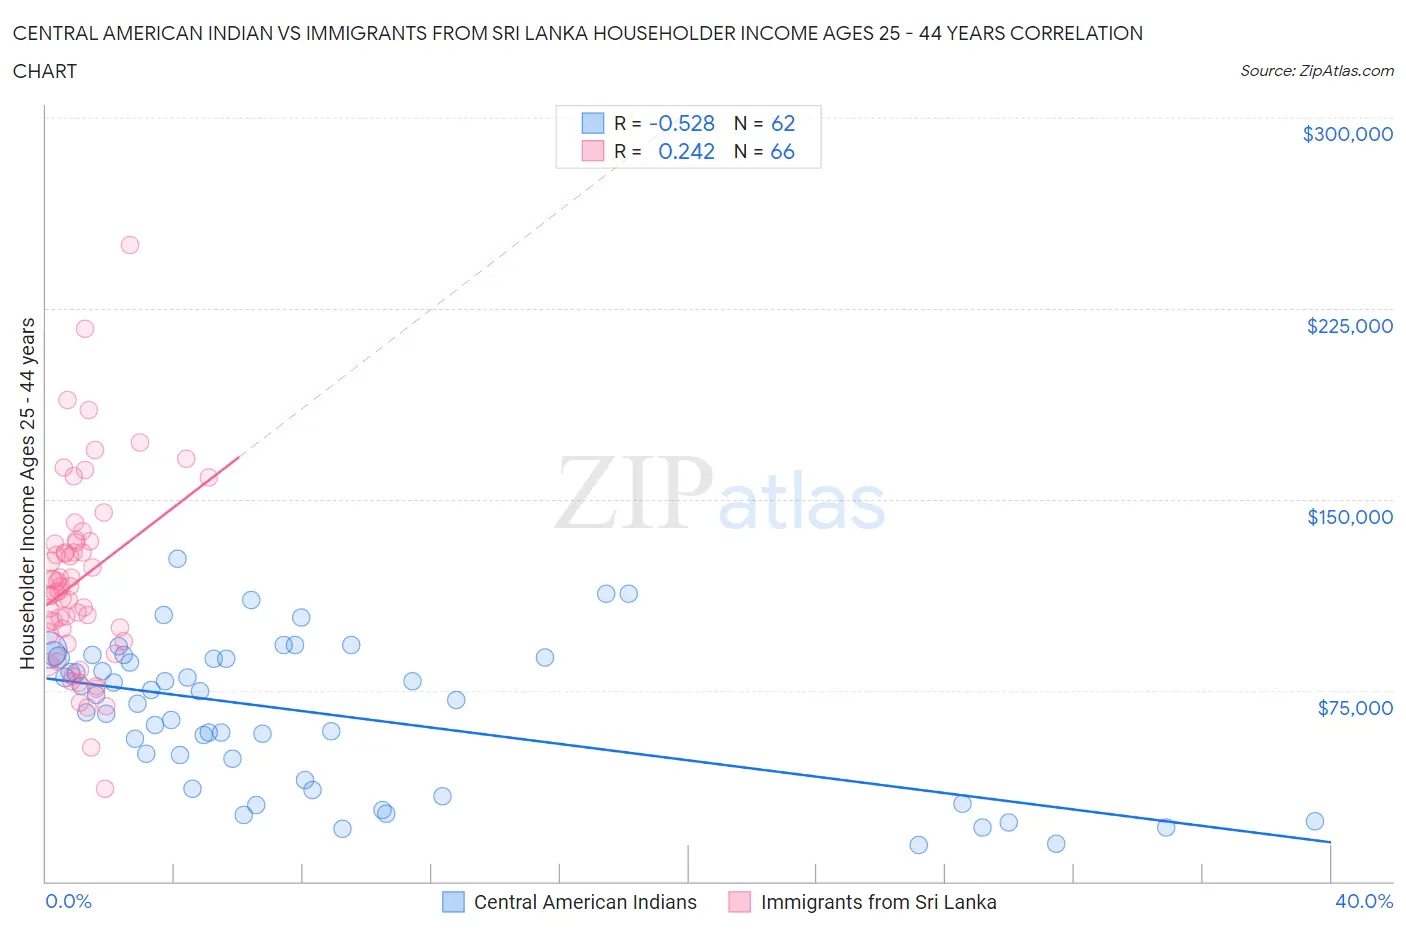 Central American Indian vs Immigrants from Sri Lanka Householder Income Ages 25 - 44 years